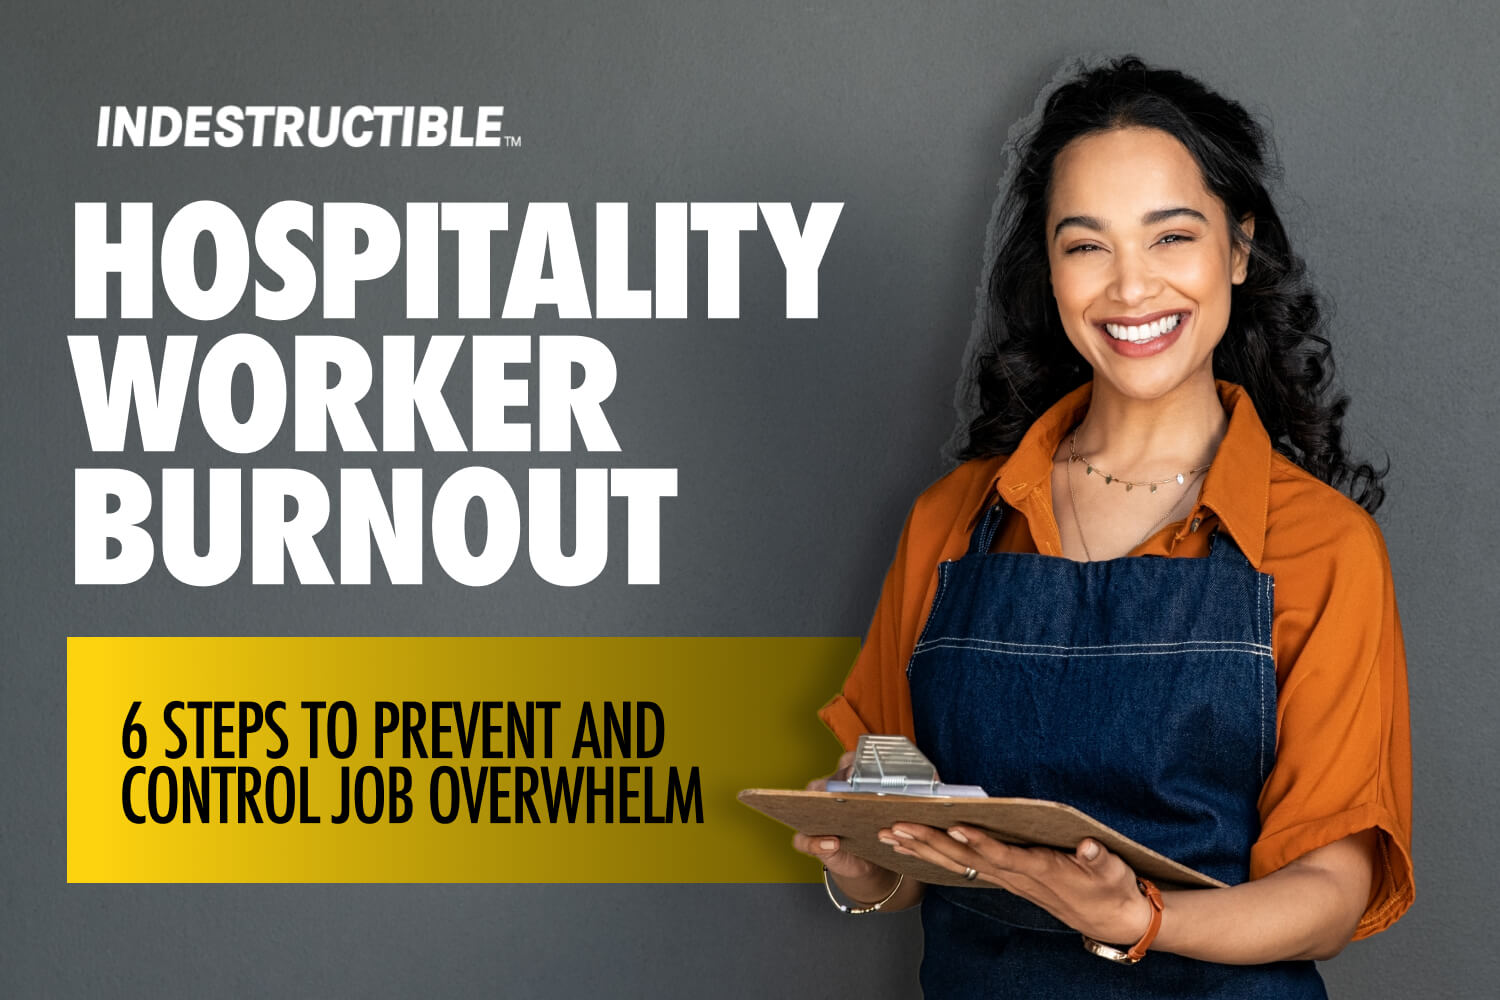 Ways Hospitality workers can prevent overwhelm